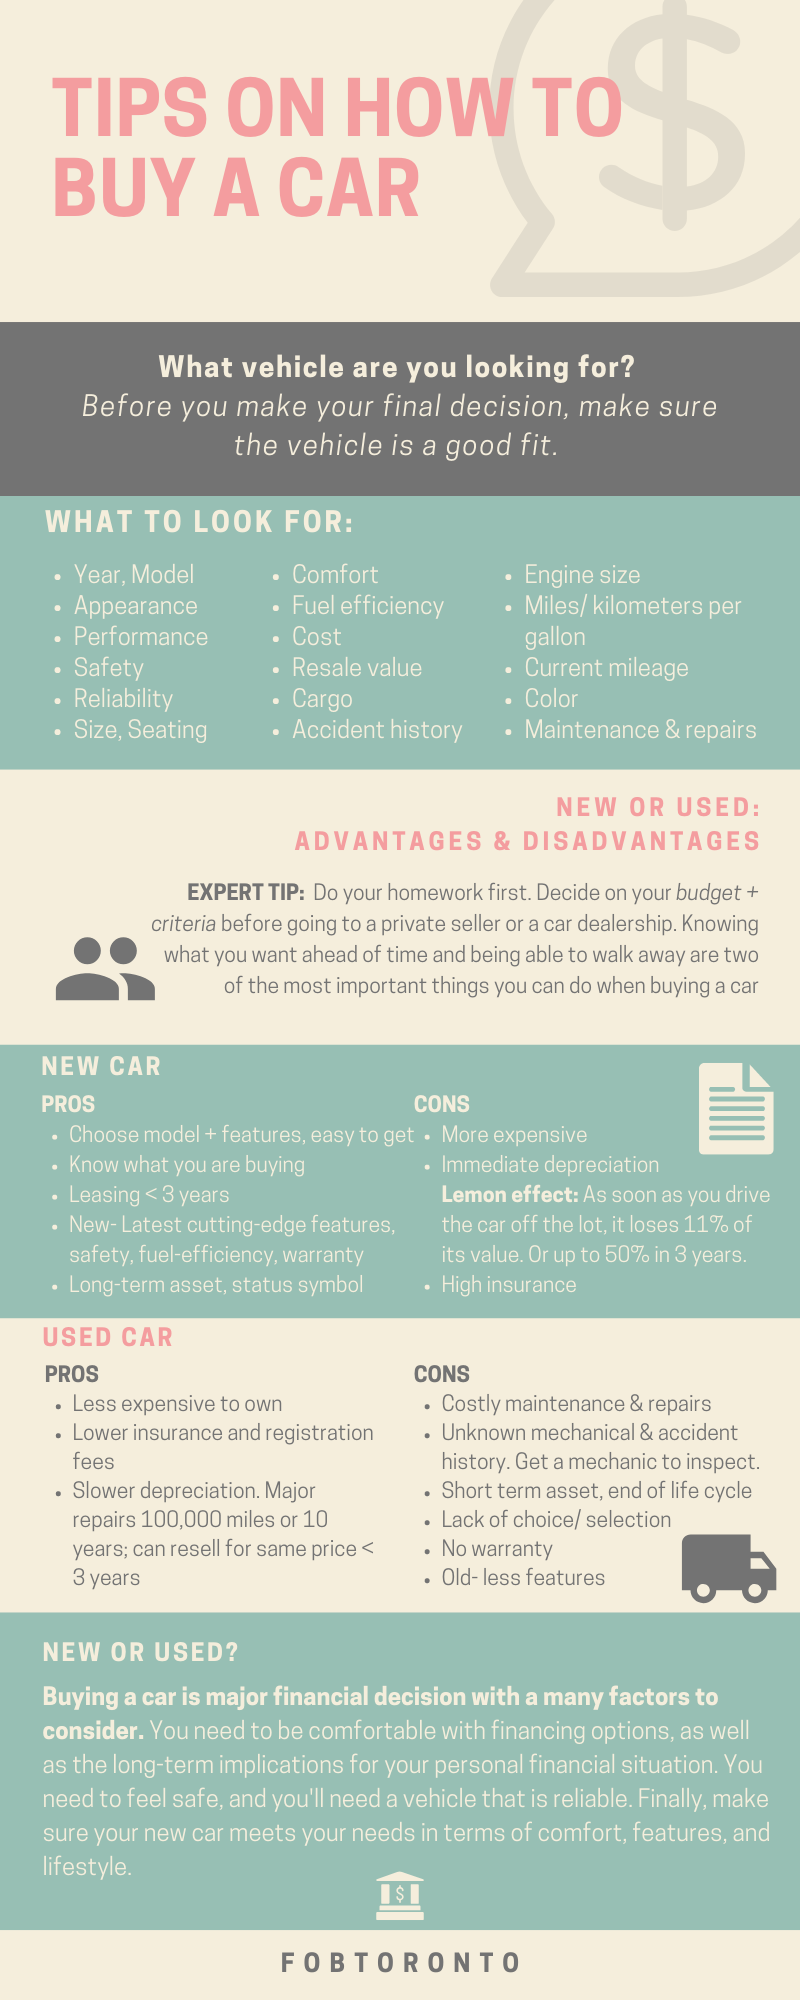 car buy tips buying vehicle new used pros cons toronto